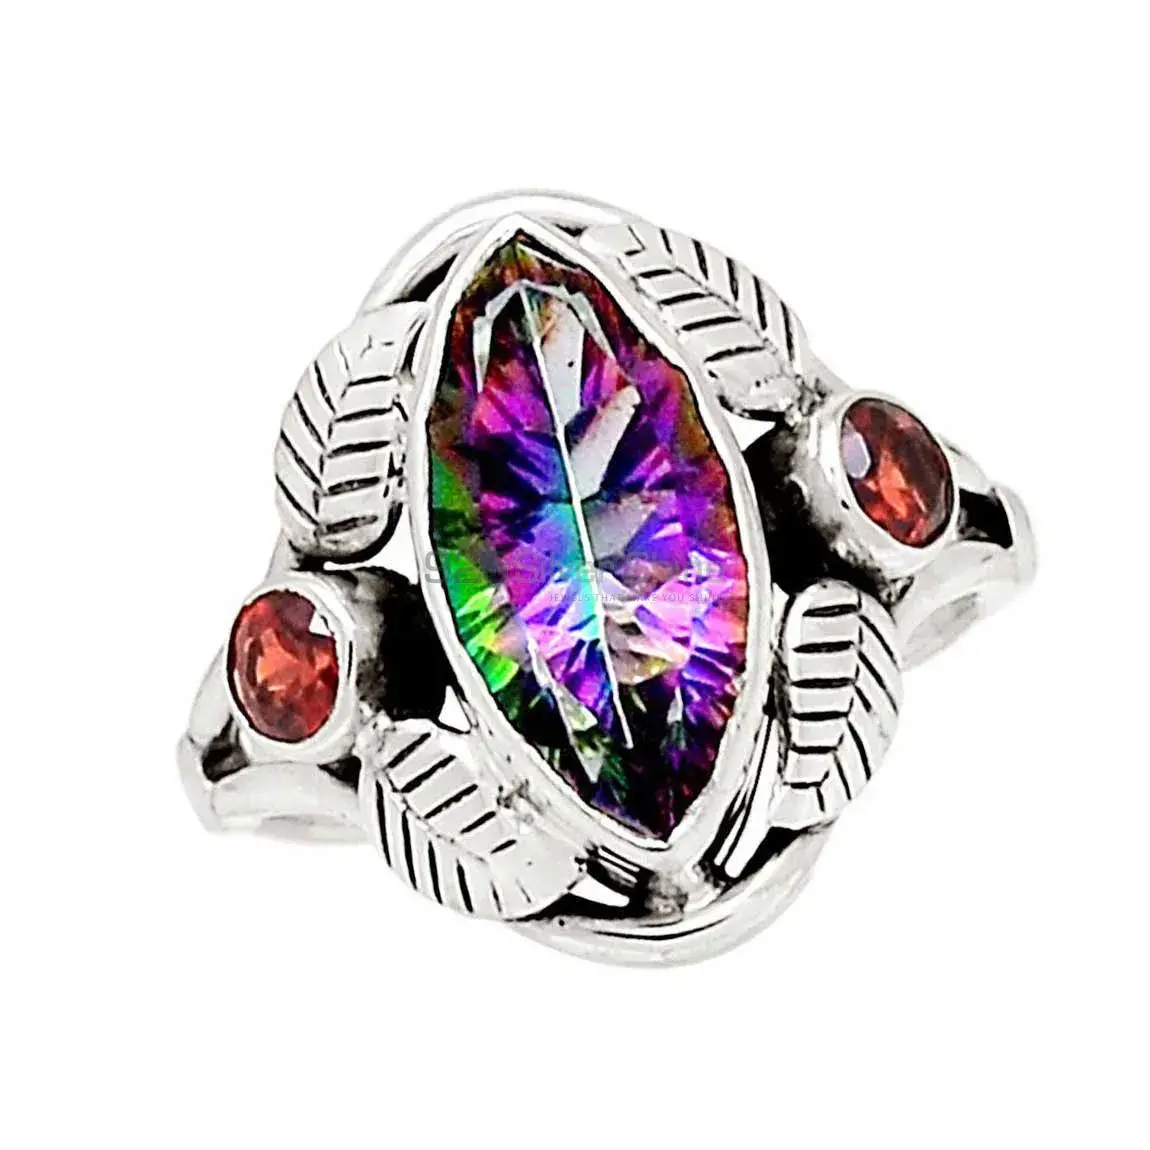 Beautiful Sterling Silver Rings In Natural Stone Jewelry 925SR2227